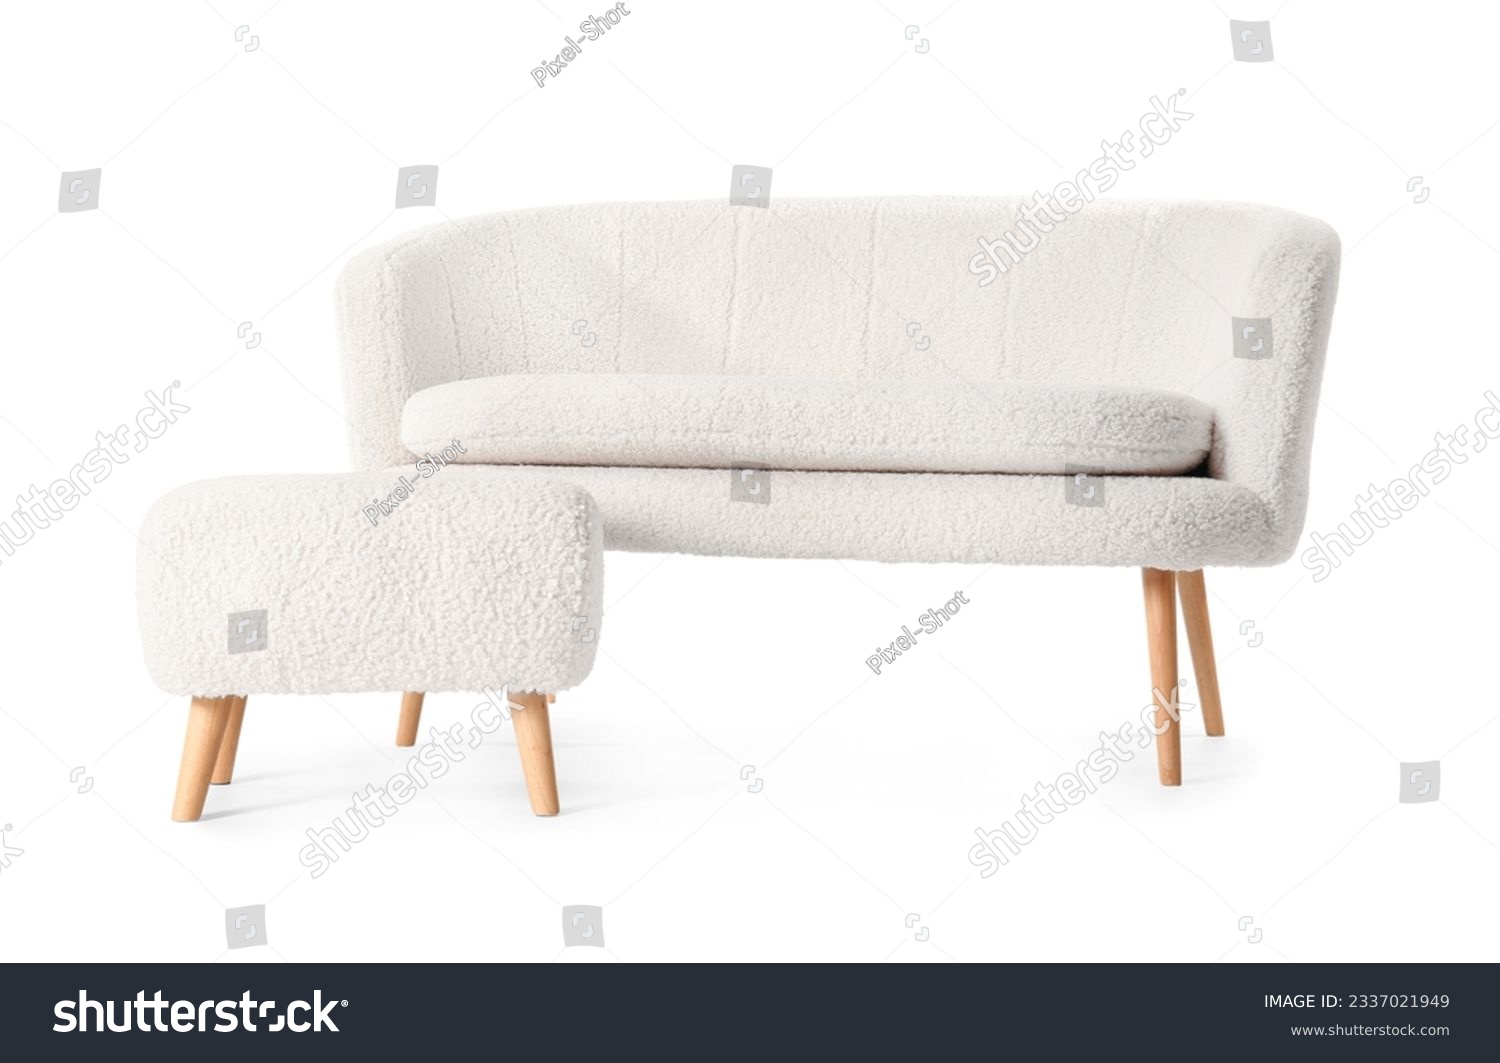 Cozy sofa and pouf isolated on white background #2337021949